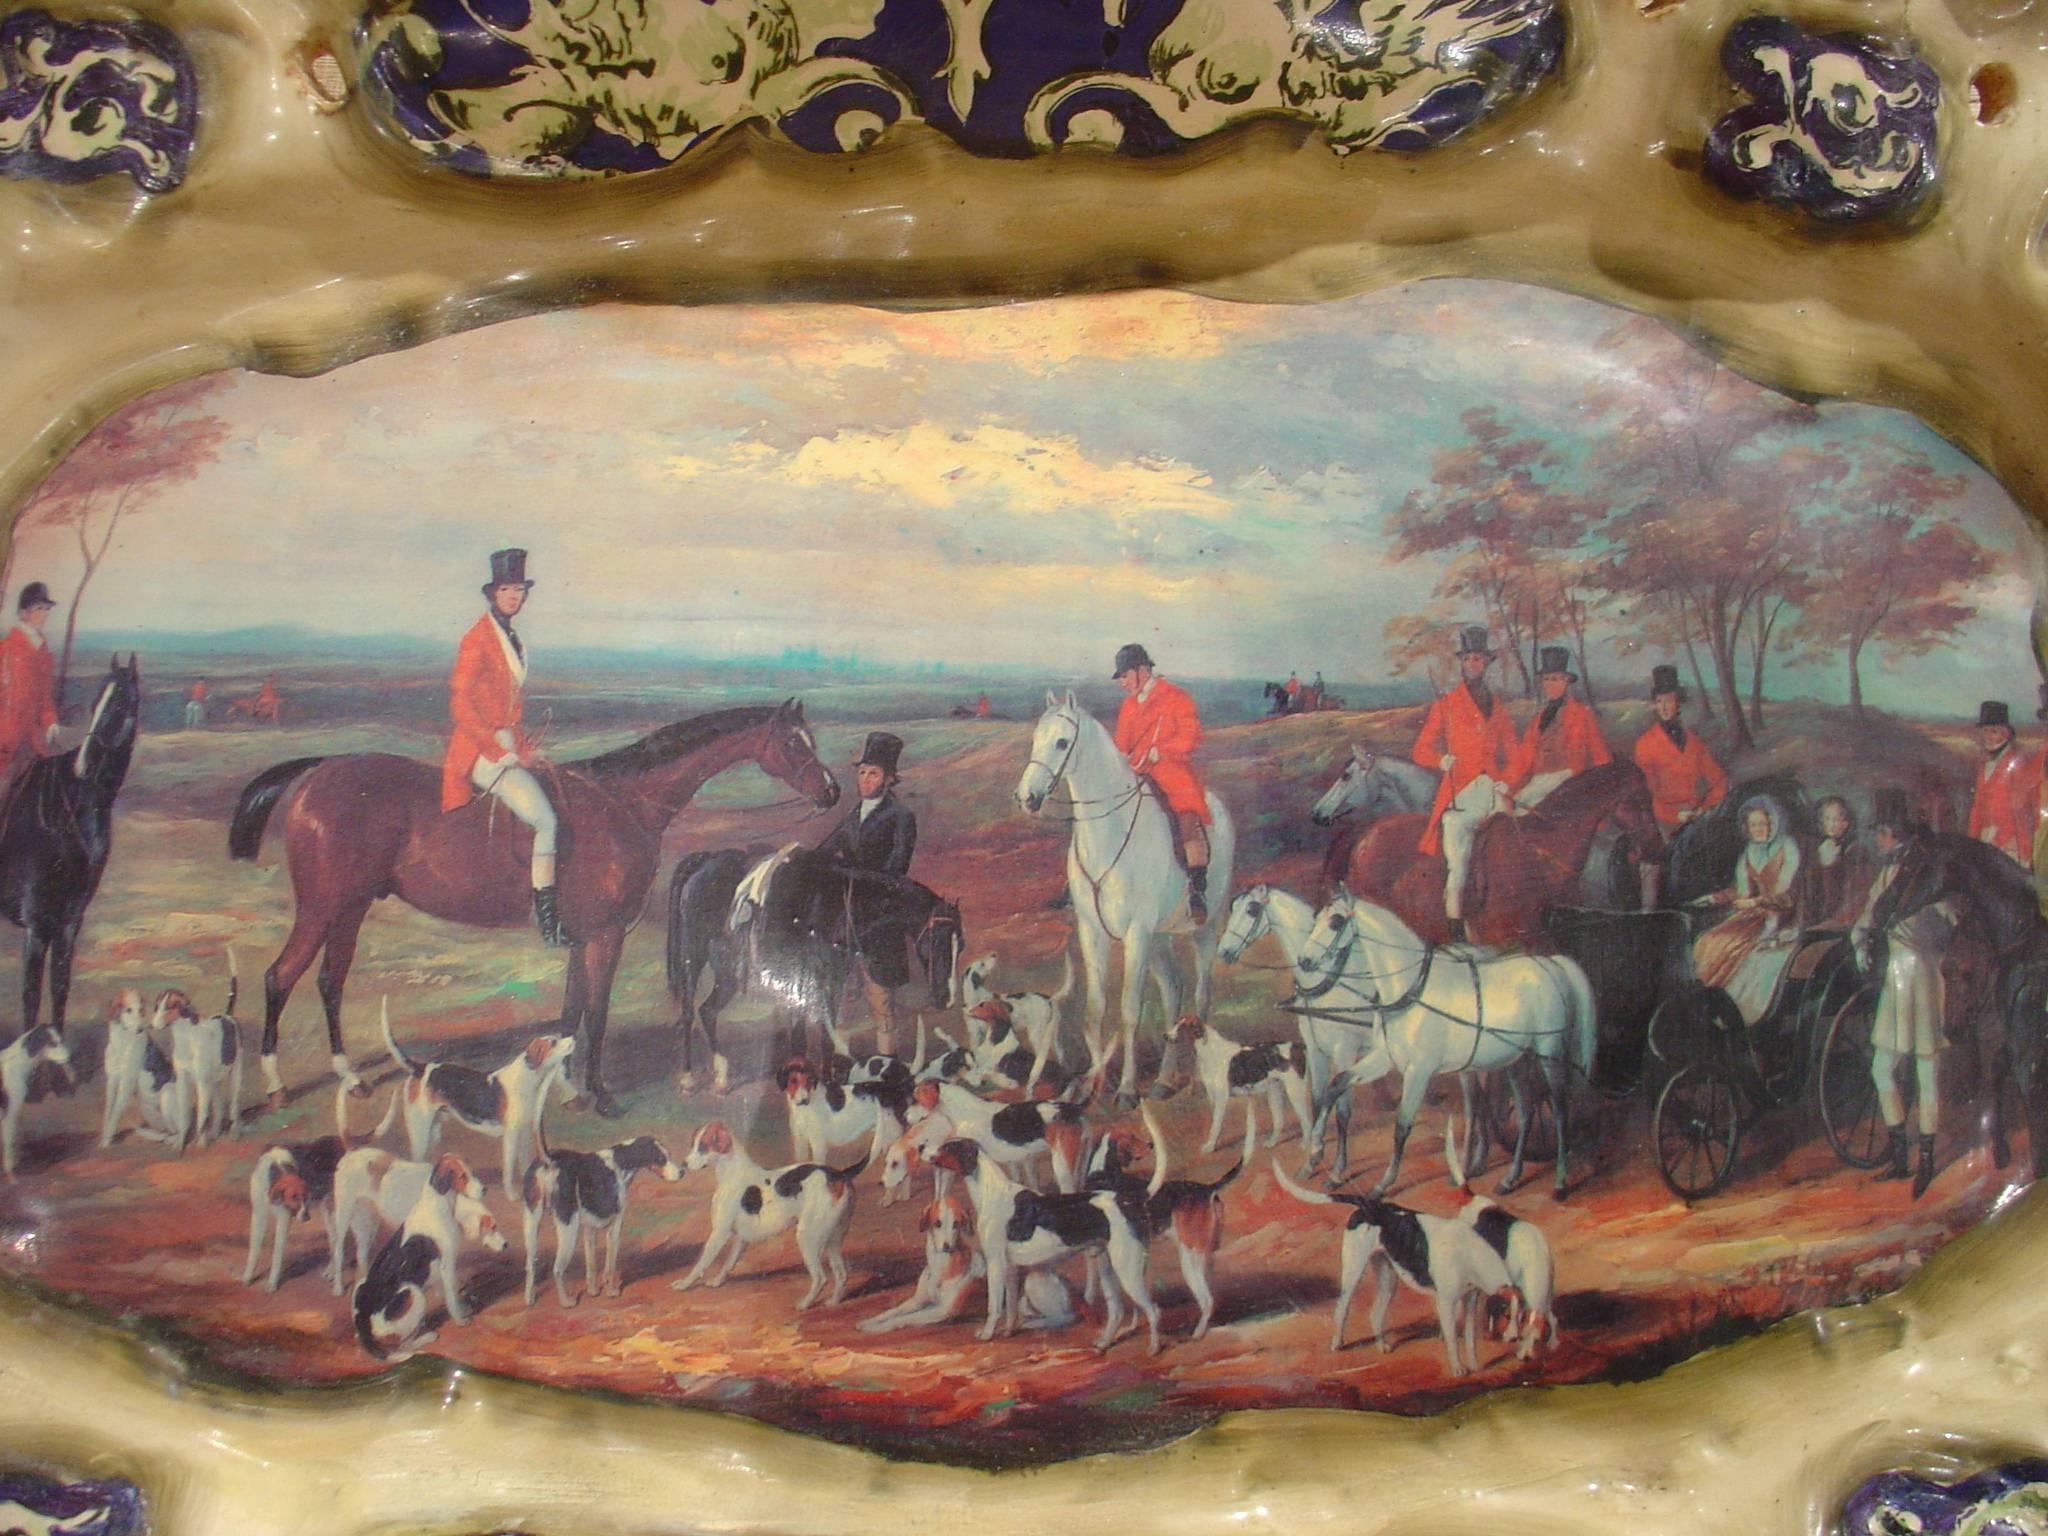 This antique ceramic platter has a central hand-painted hunting scene and originates from Northern Brittany. There is an irregular border surrounding the scene that has insets of raised hand-painted sections. The scene is that of a Classic English